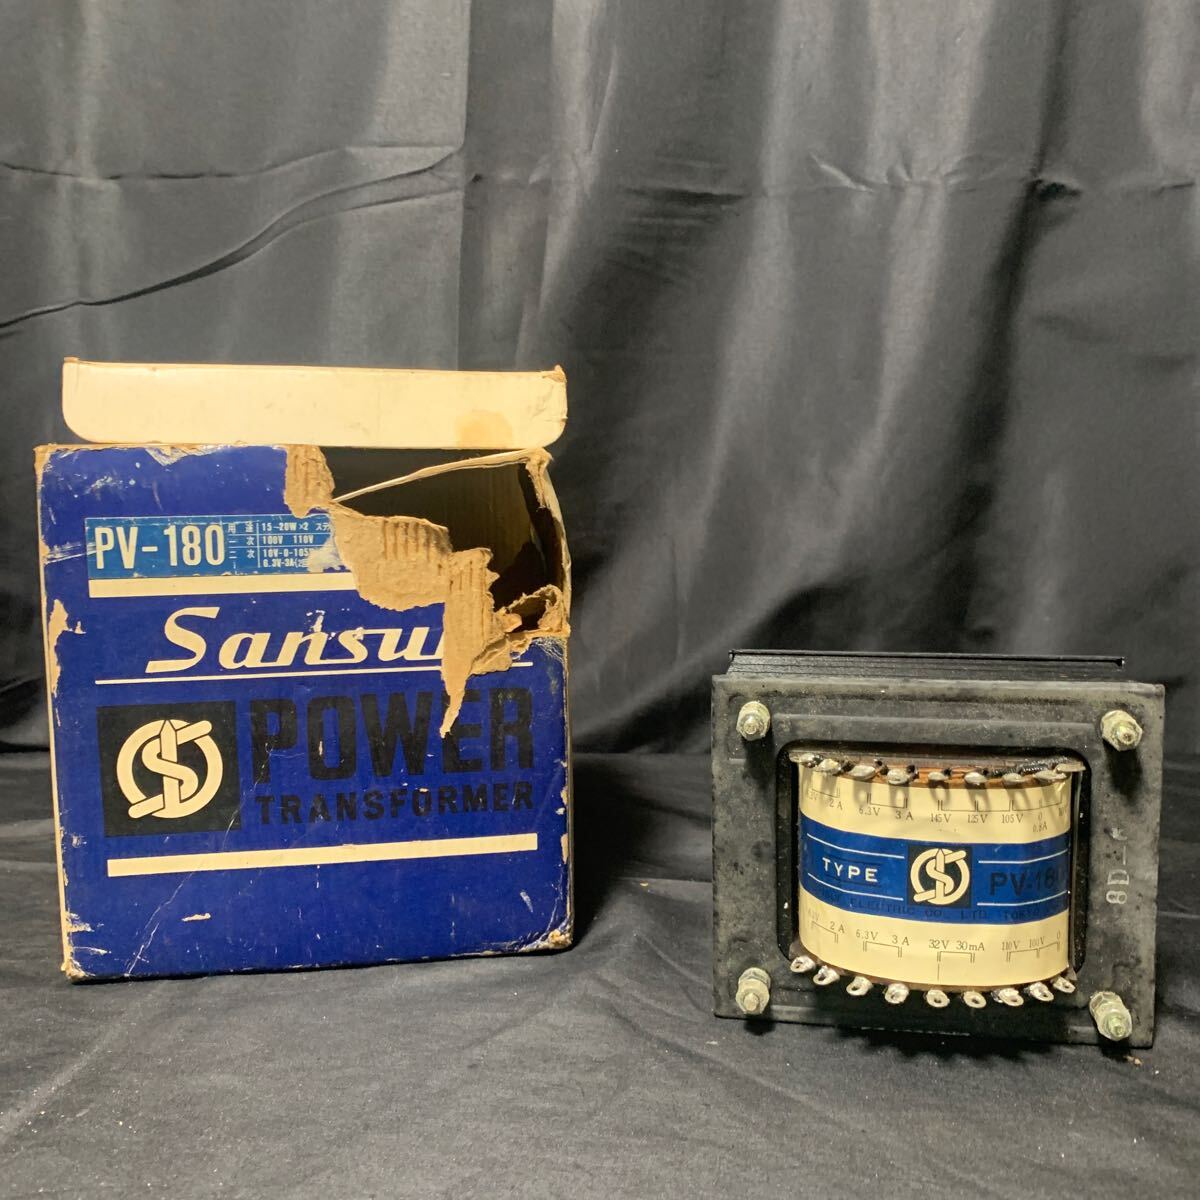 SANSUI Sansui TYPE PV-180 power supply trance tube amplifier operation not yet verification tube amplifier for parts sound equipment 